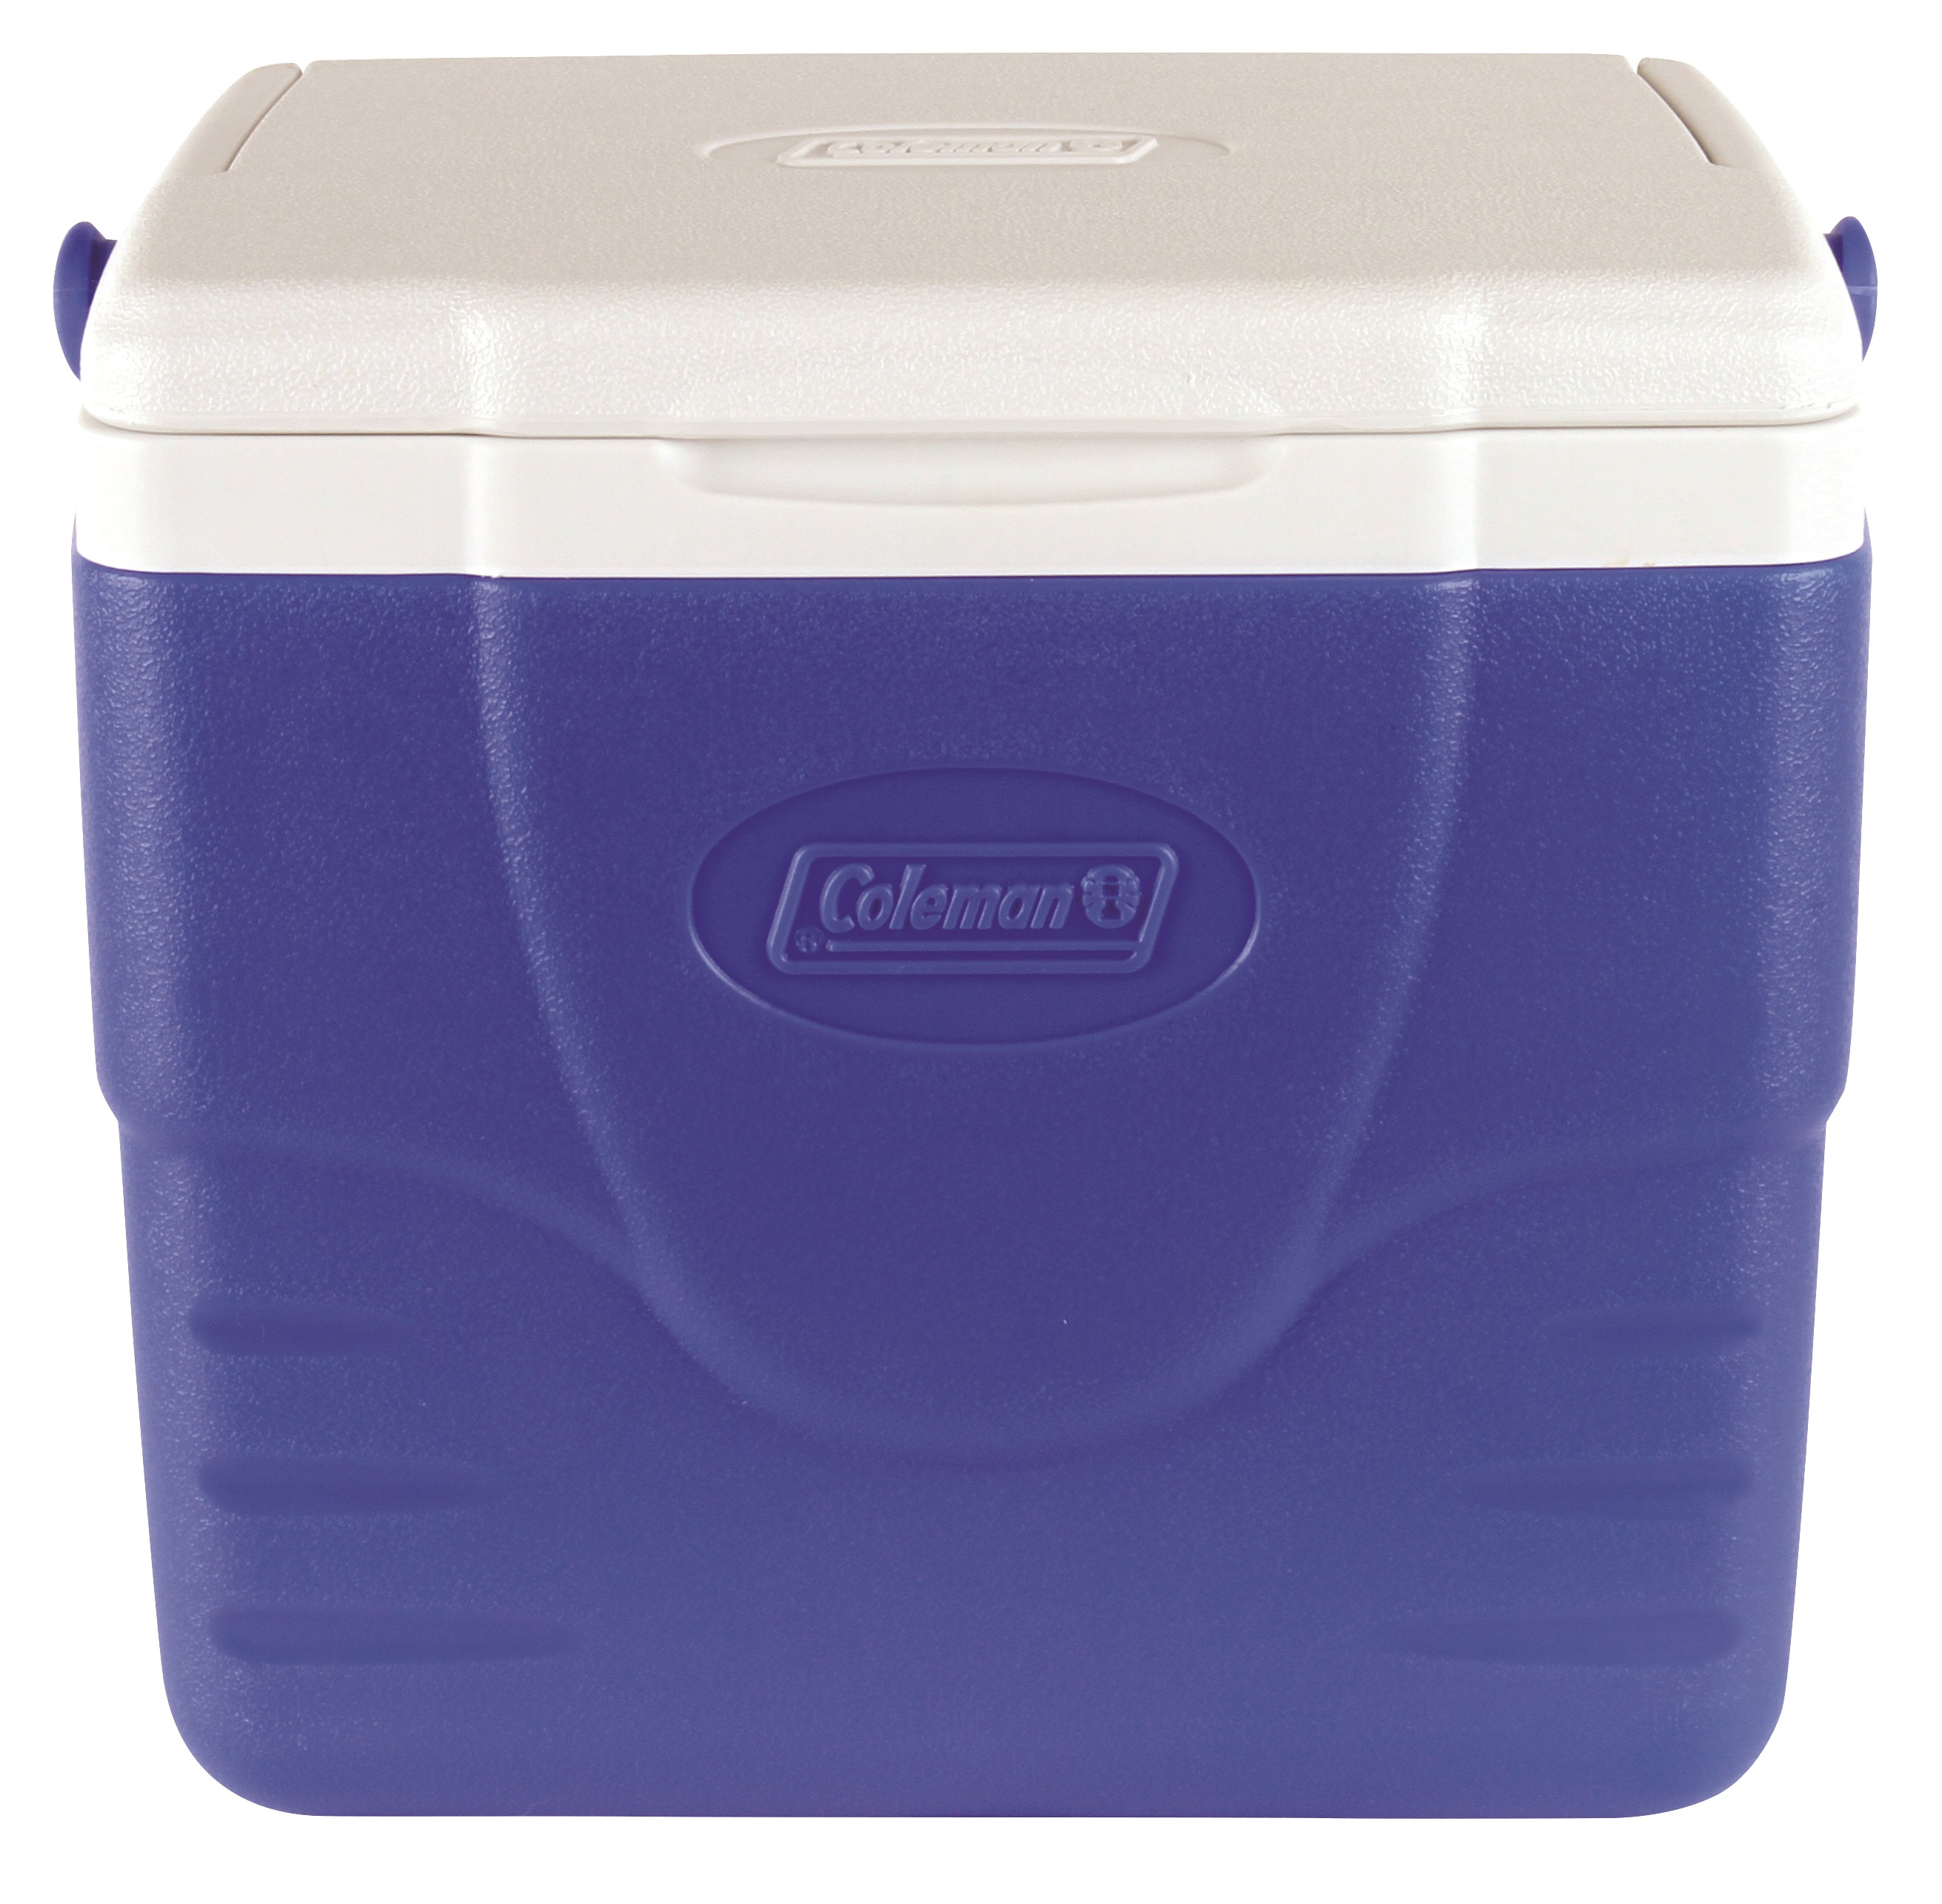 Coleman 9-Quart Cooler without Tray - image 2 of 8